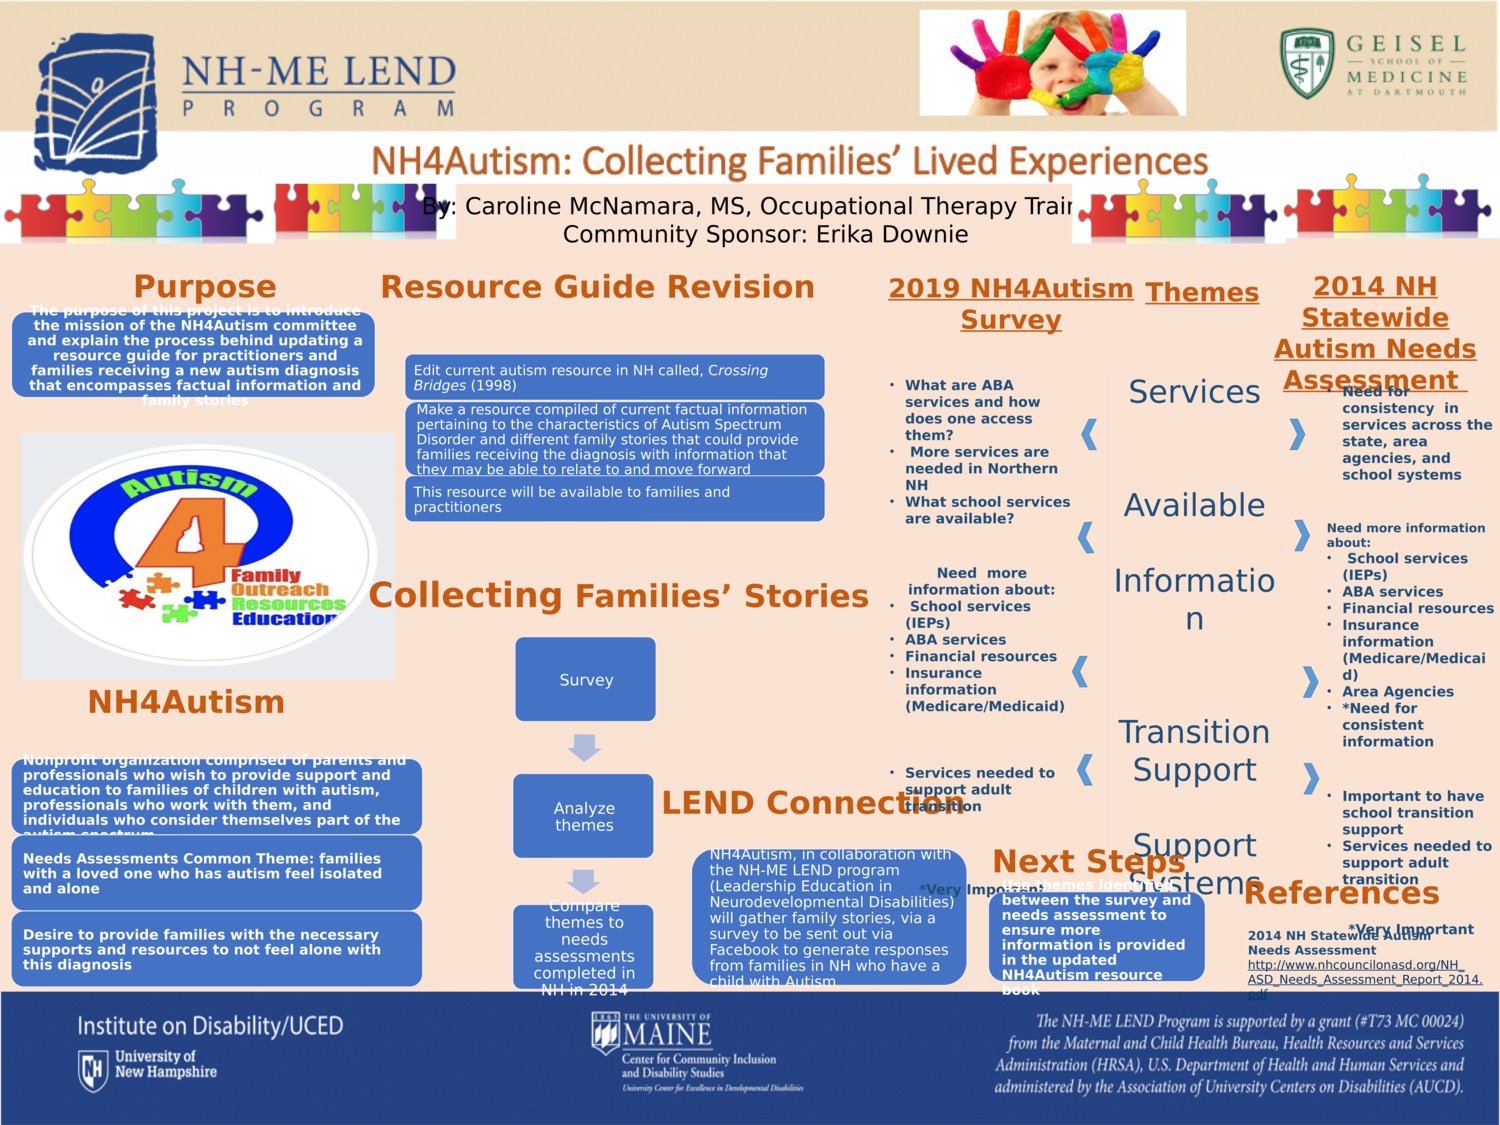 Nh4autism: Collecting Families' Lived Experiences by cly229